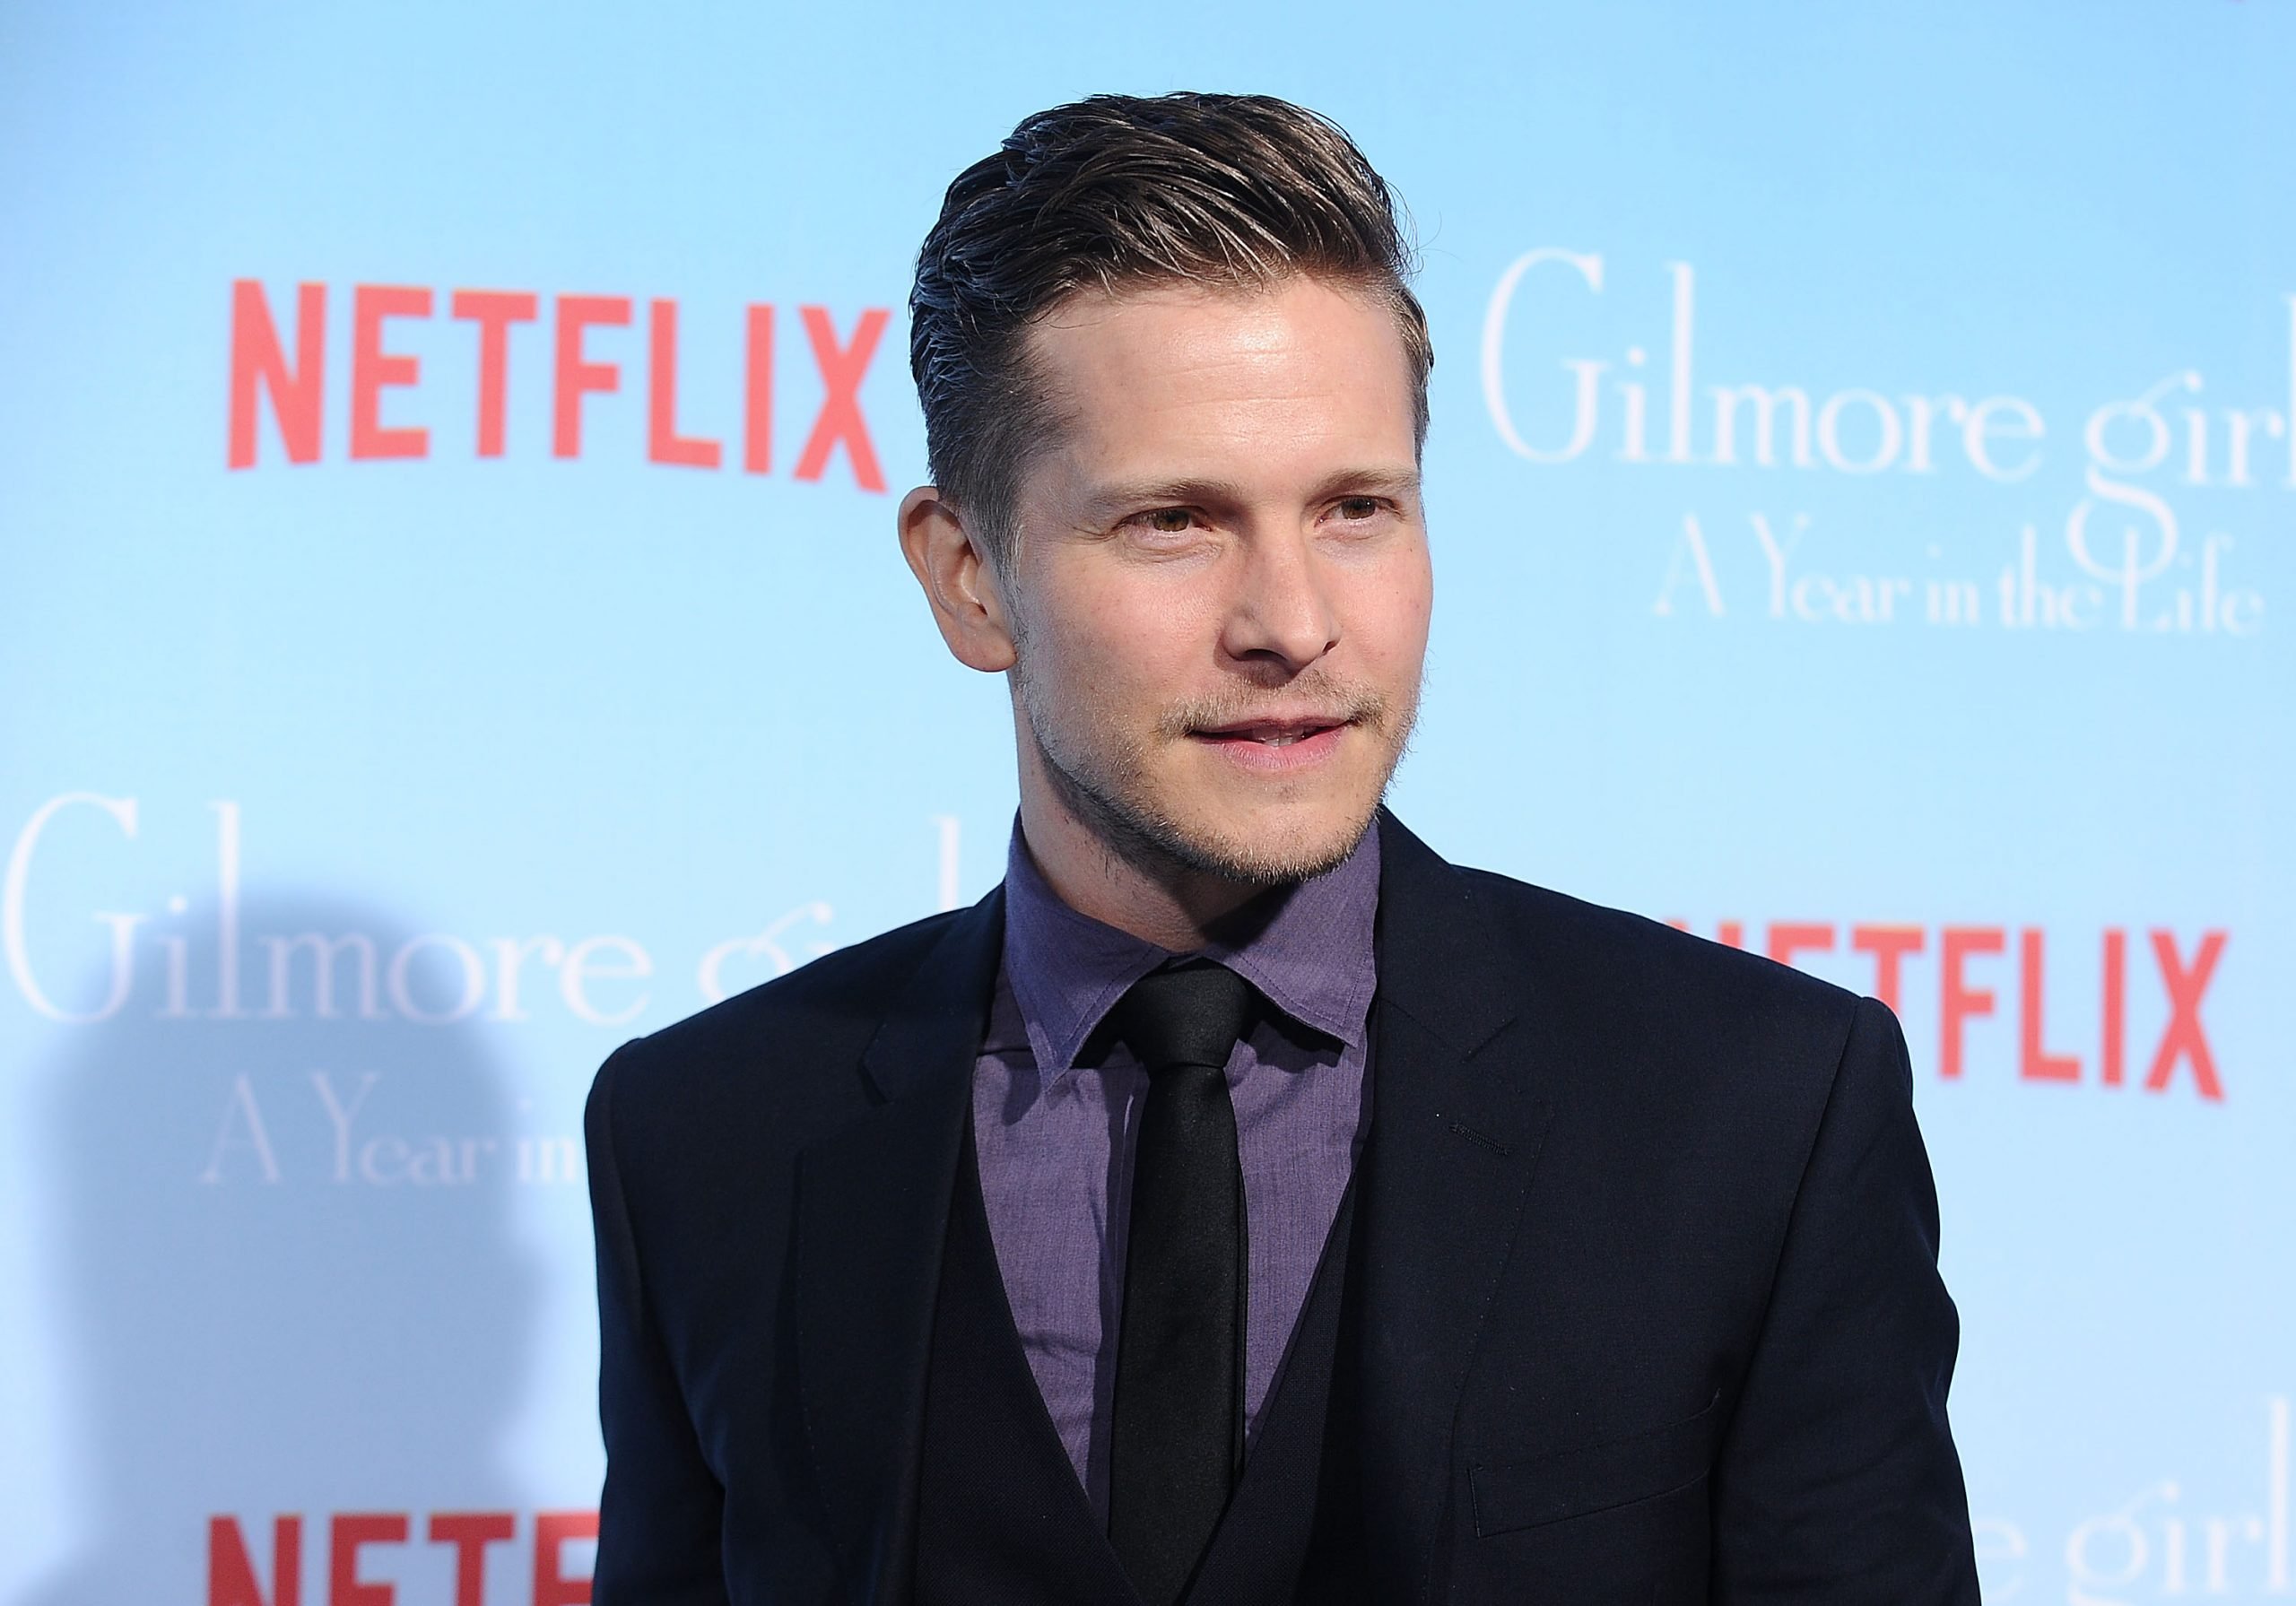 Matt Czuchry poses for a photo at the premiere of 'Gilmore Girls: A Year in the Life' in 2016